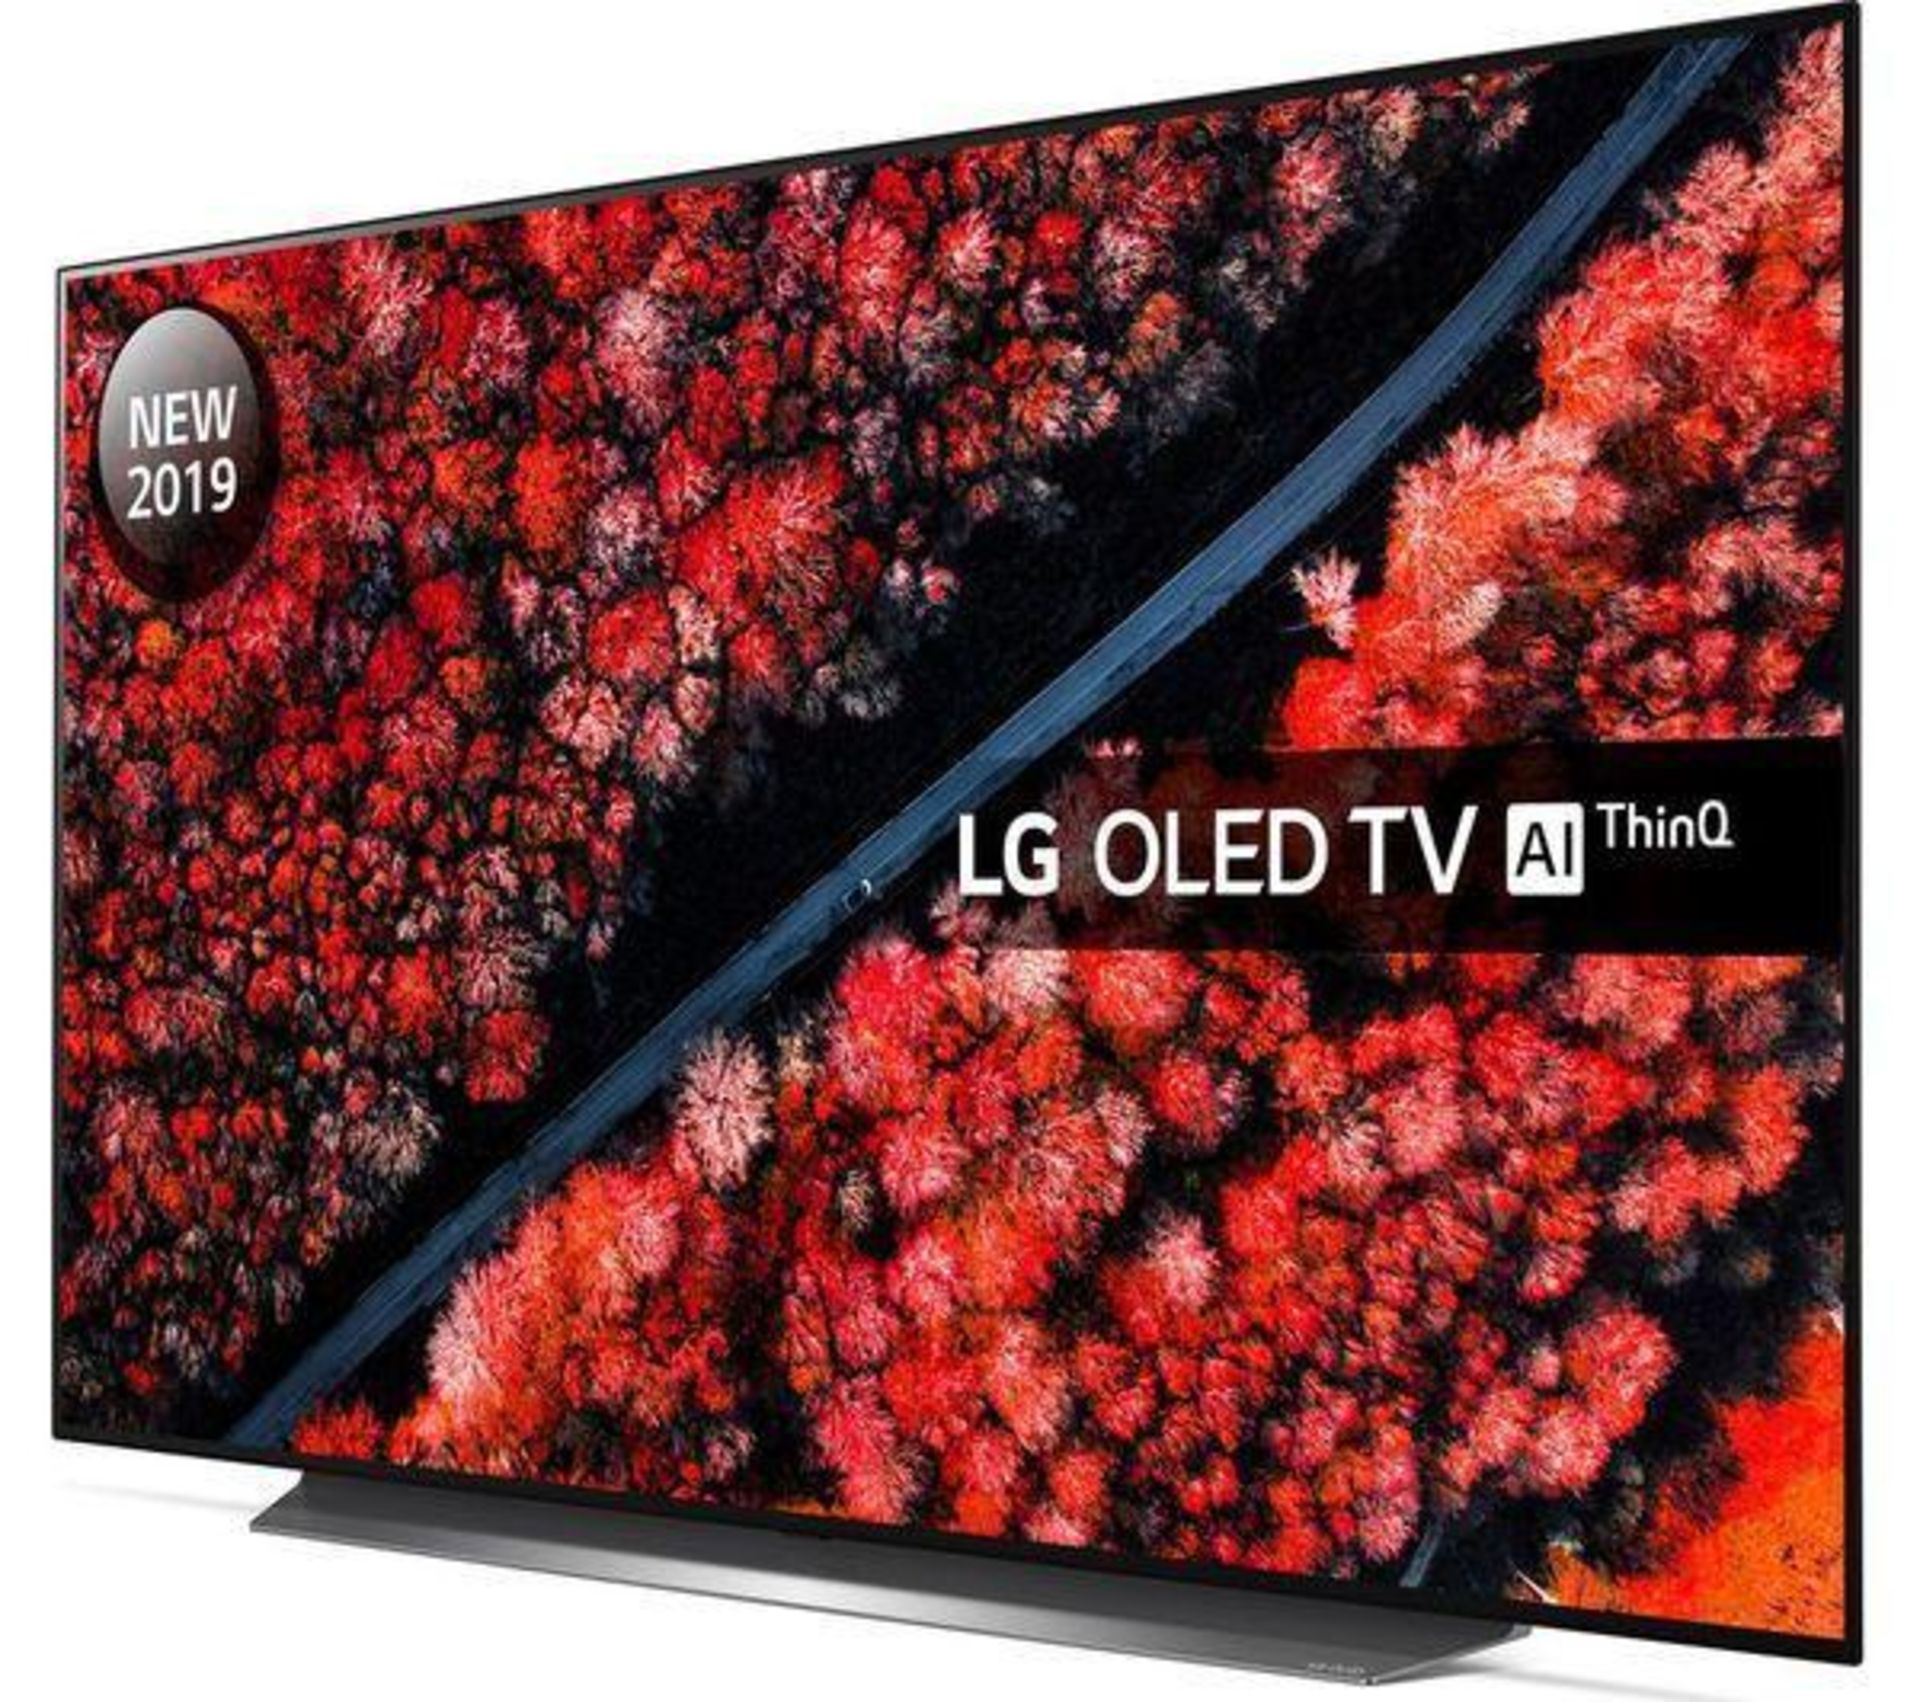 LG OLED65C9MLB 65" Smart 4K Ultra HD HDR OLED TV with Google Assistant. RRP £499.99. Our experts - Image 2 of 3